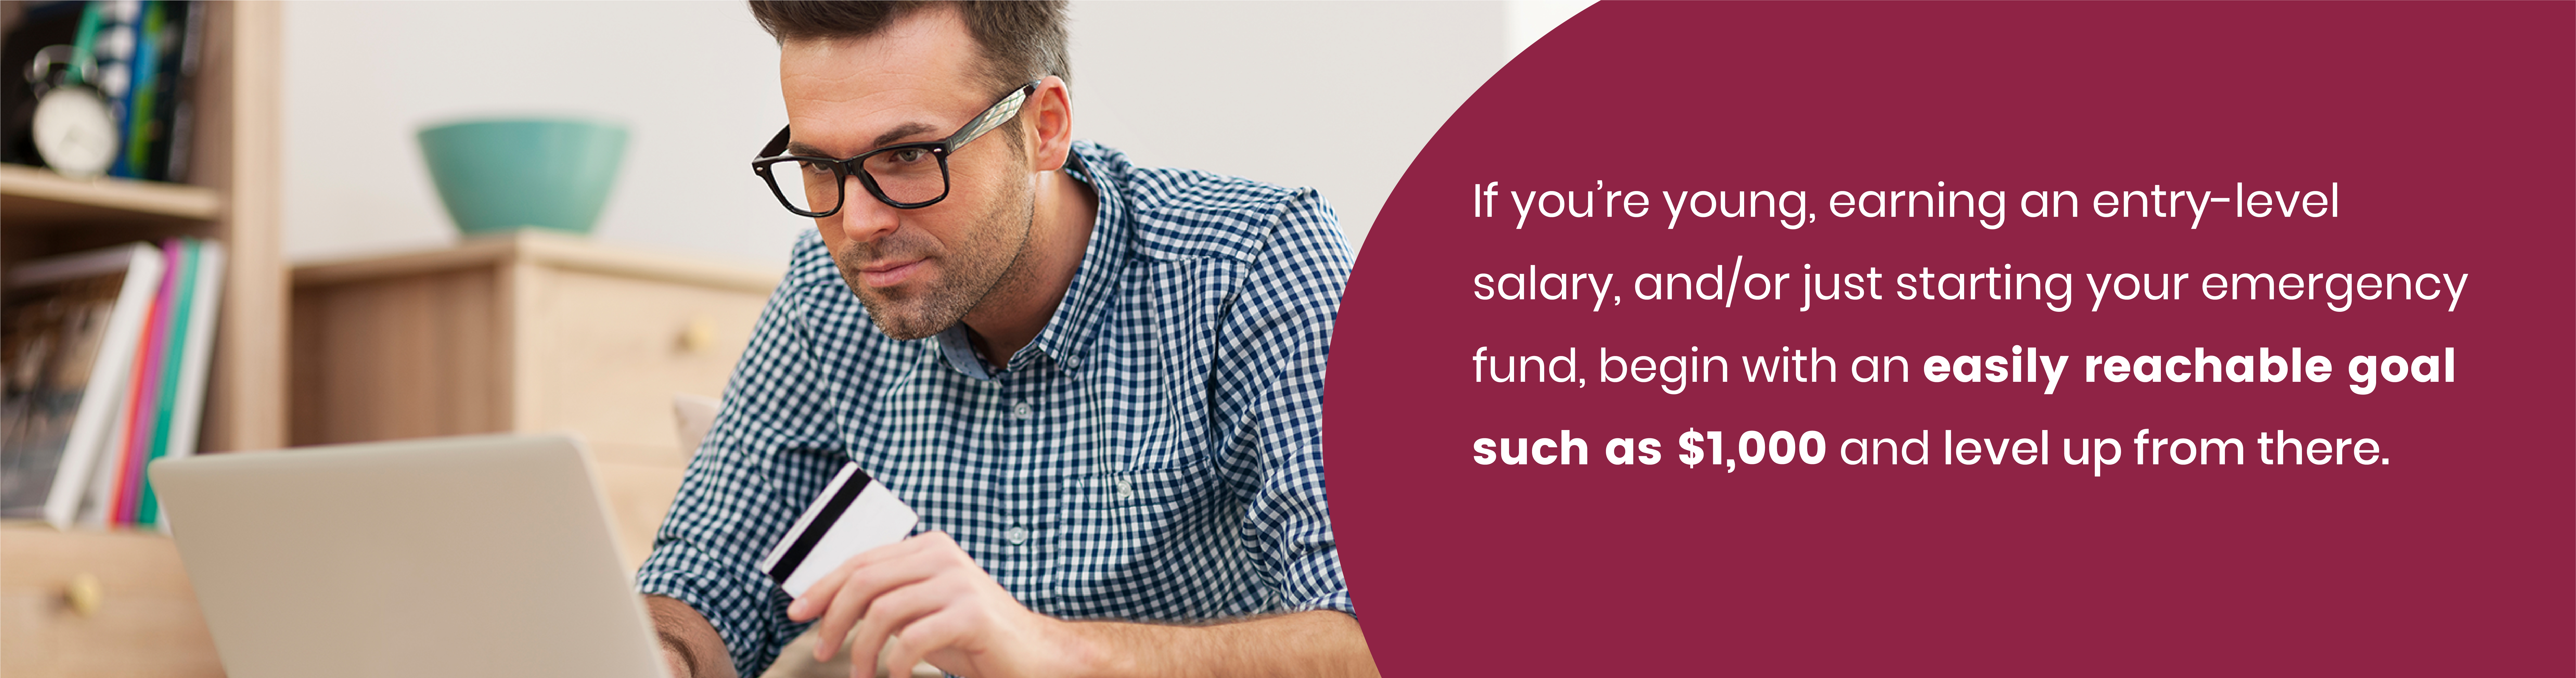 If you're young, earning an entry-level salary, and/or just starting your emergency fund, begin with an easily reachable goal such as $1,000 and level up from there.